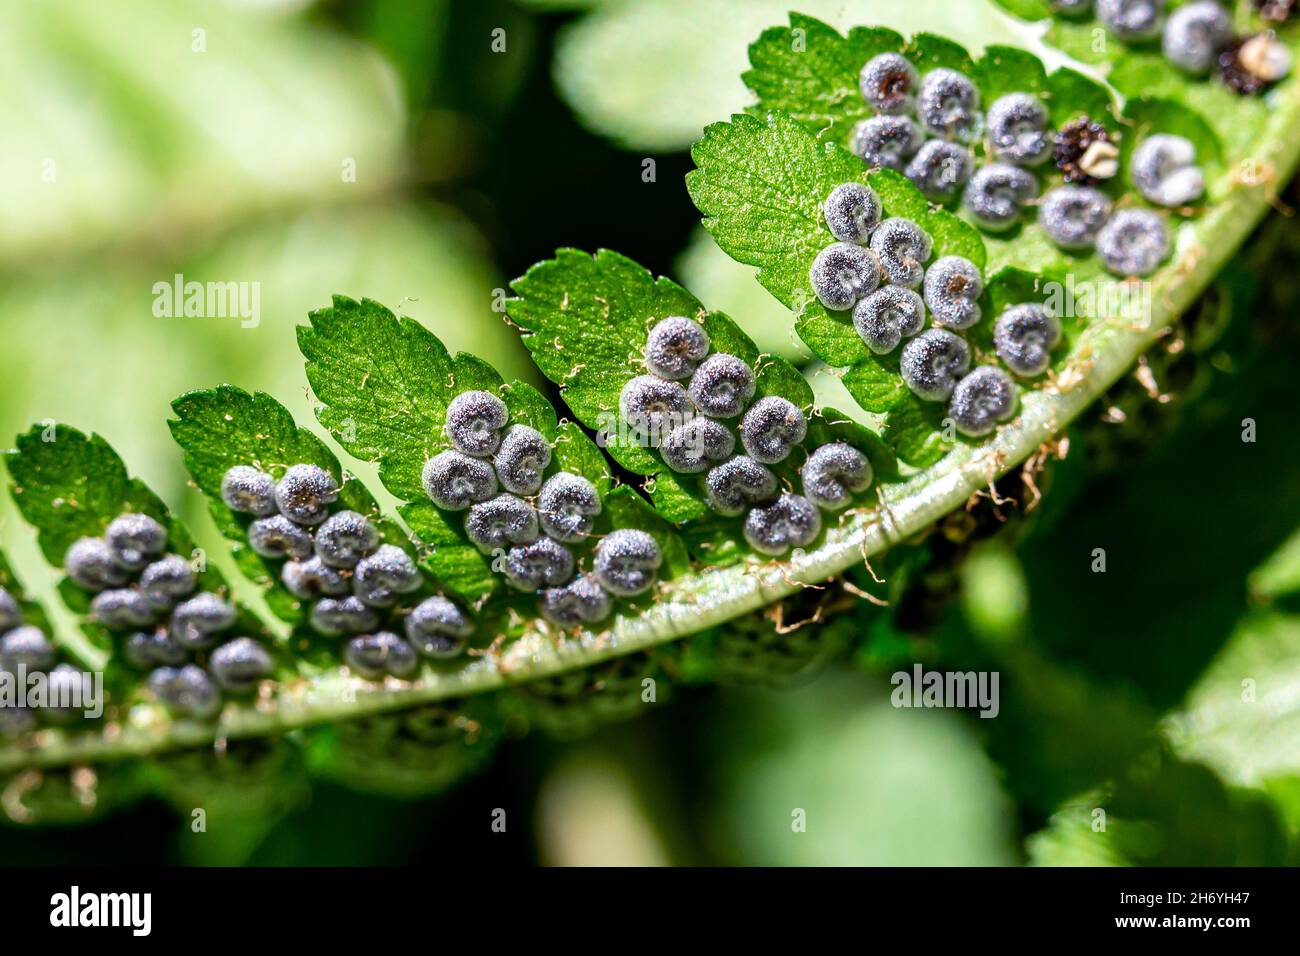 A close up of sorus on the underside of a fern leaf Stock Photo